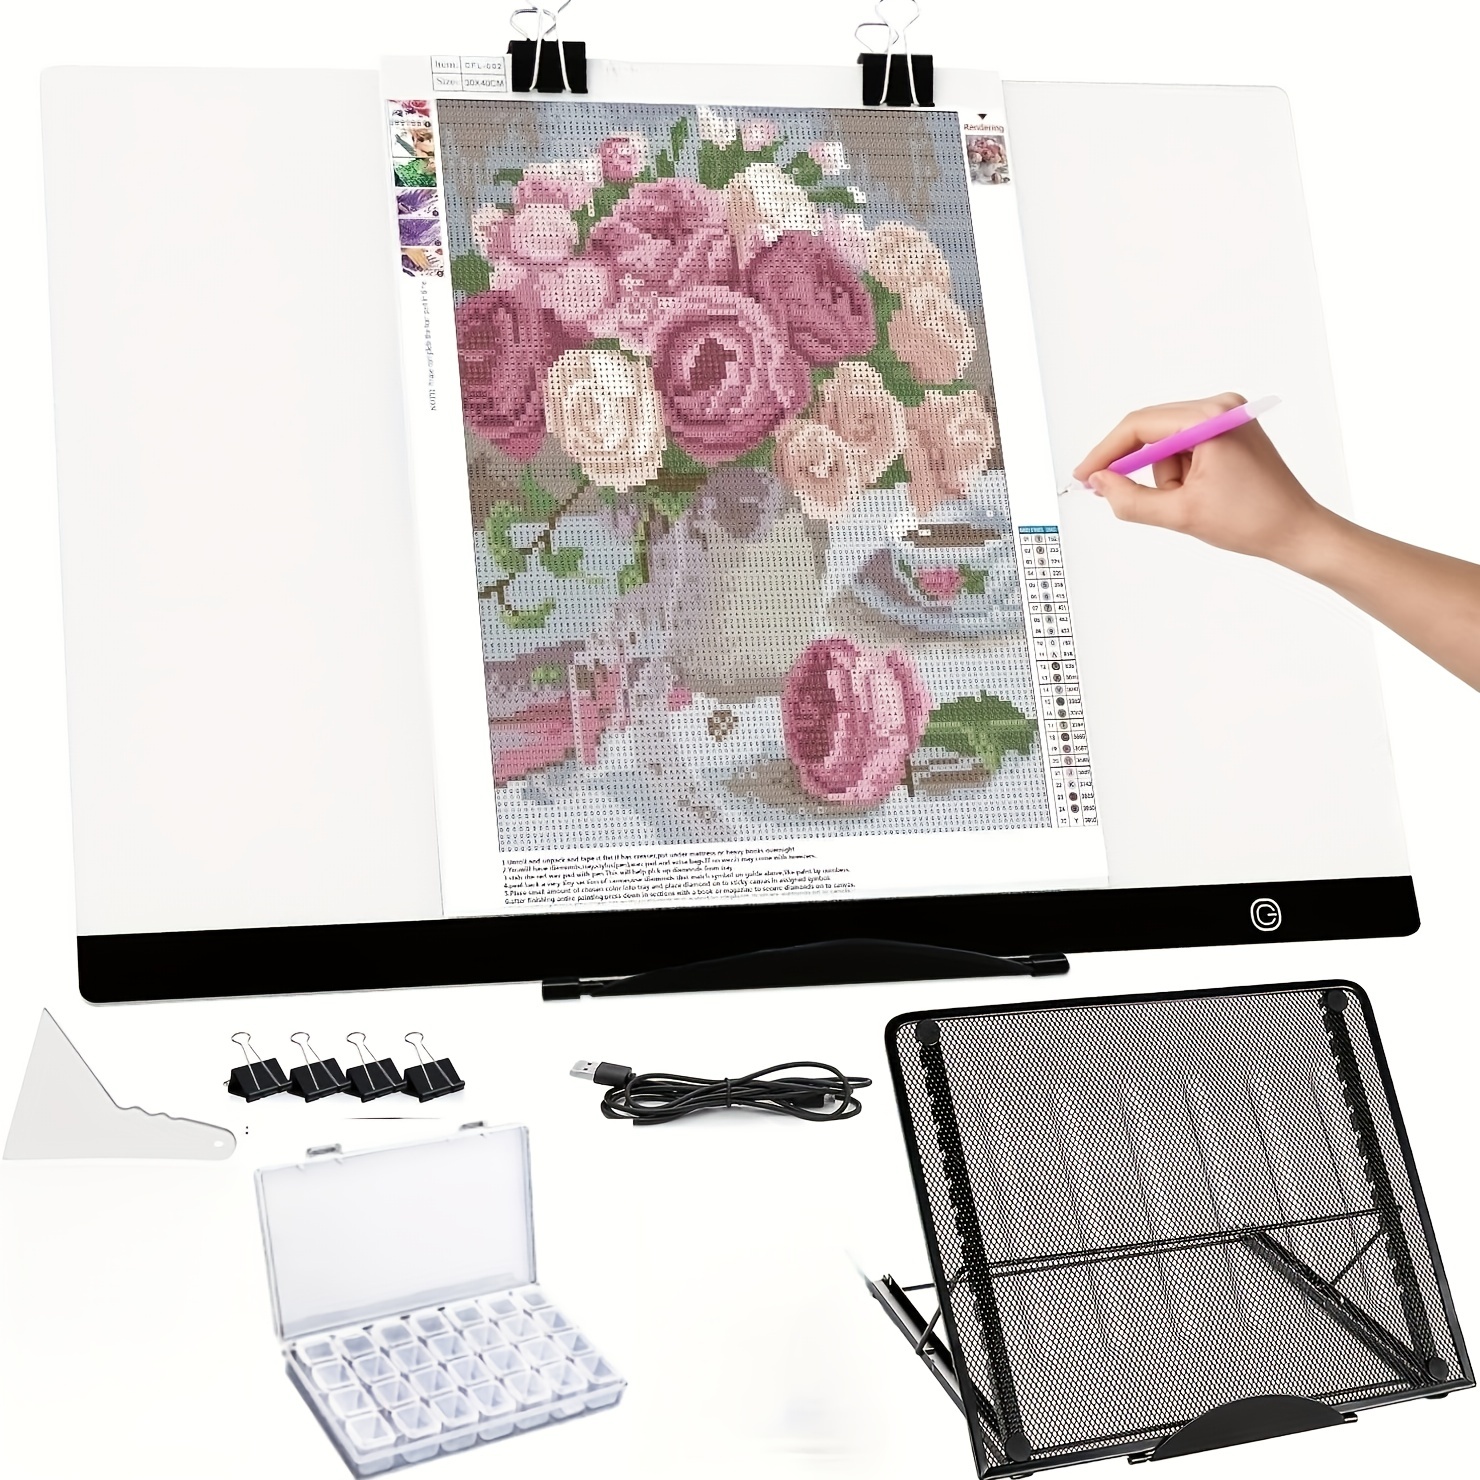  Mlife LED Light Pad - Diamond Painting A4 Light Box Tracing  Light Board with 3 Brightness, Ideal for Sketching, Animation, Drawing  Light Box with 4 Fasten Clips